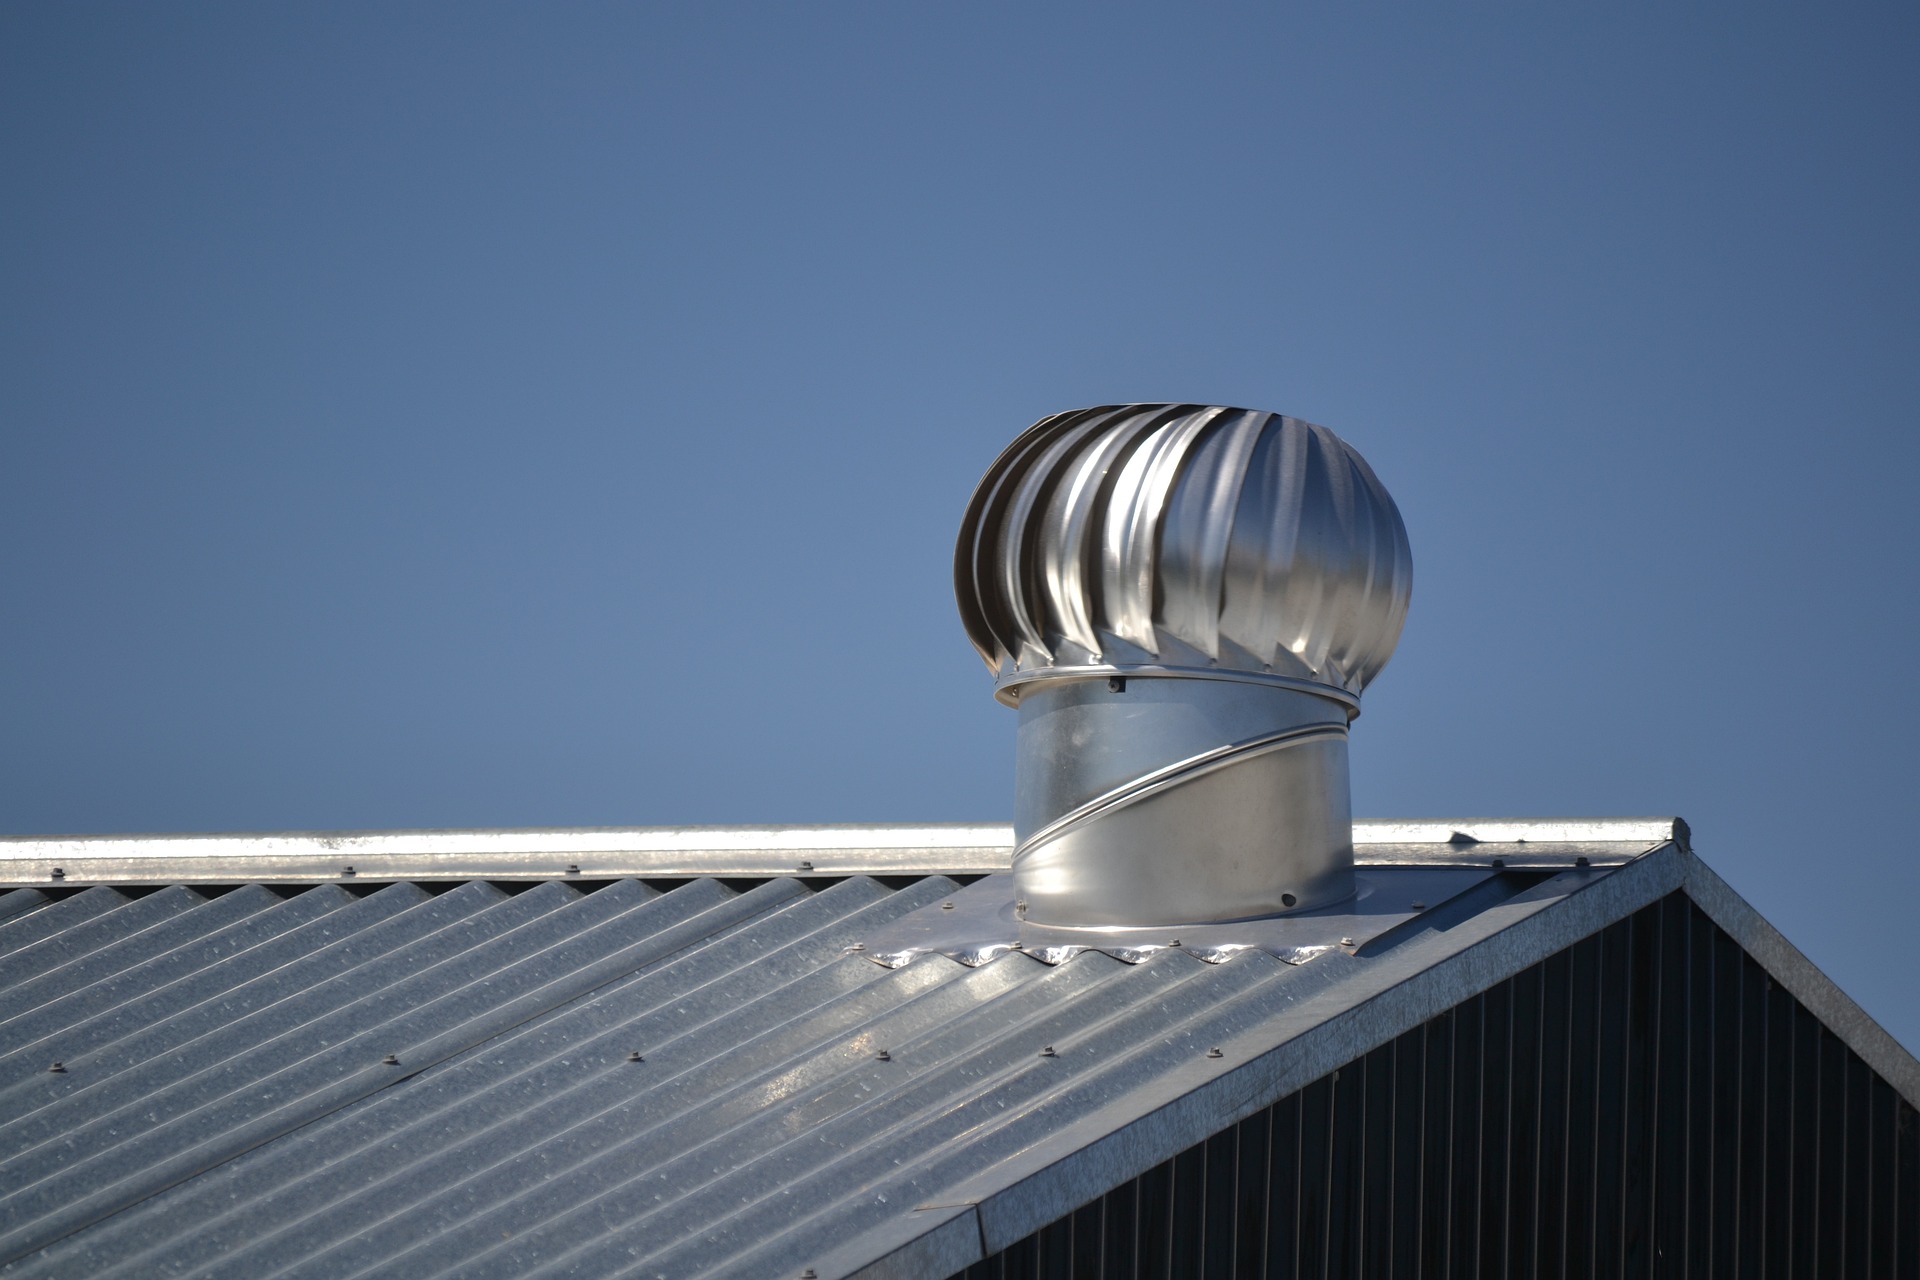 A shiny, silver whirlybird roof vent installed on a roof on a sunny day